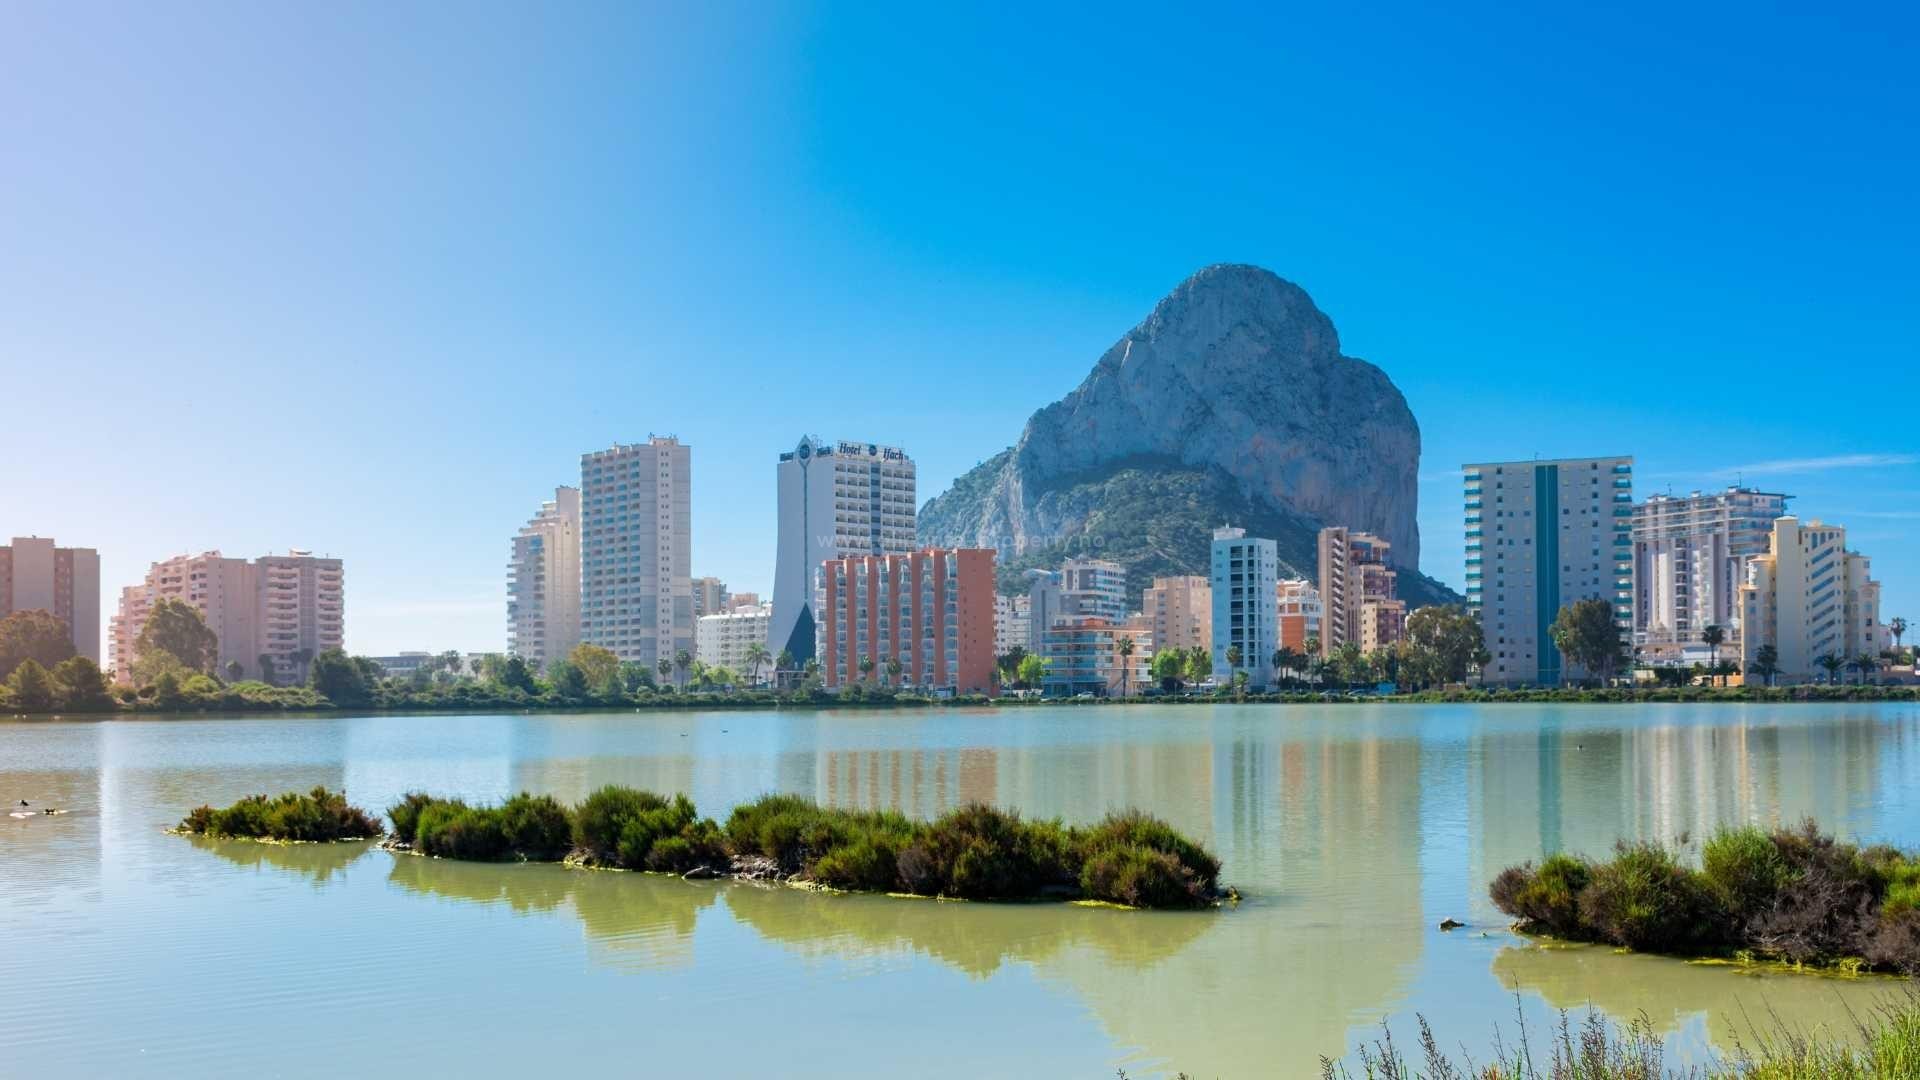 Modern flats/apartments in Calpe, Alicante province, 2/3 bedrooms, 2 bathrooms. Some with sea view. Great common area with swimming pool for adults and children.